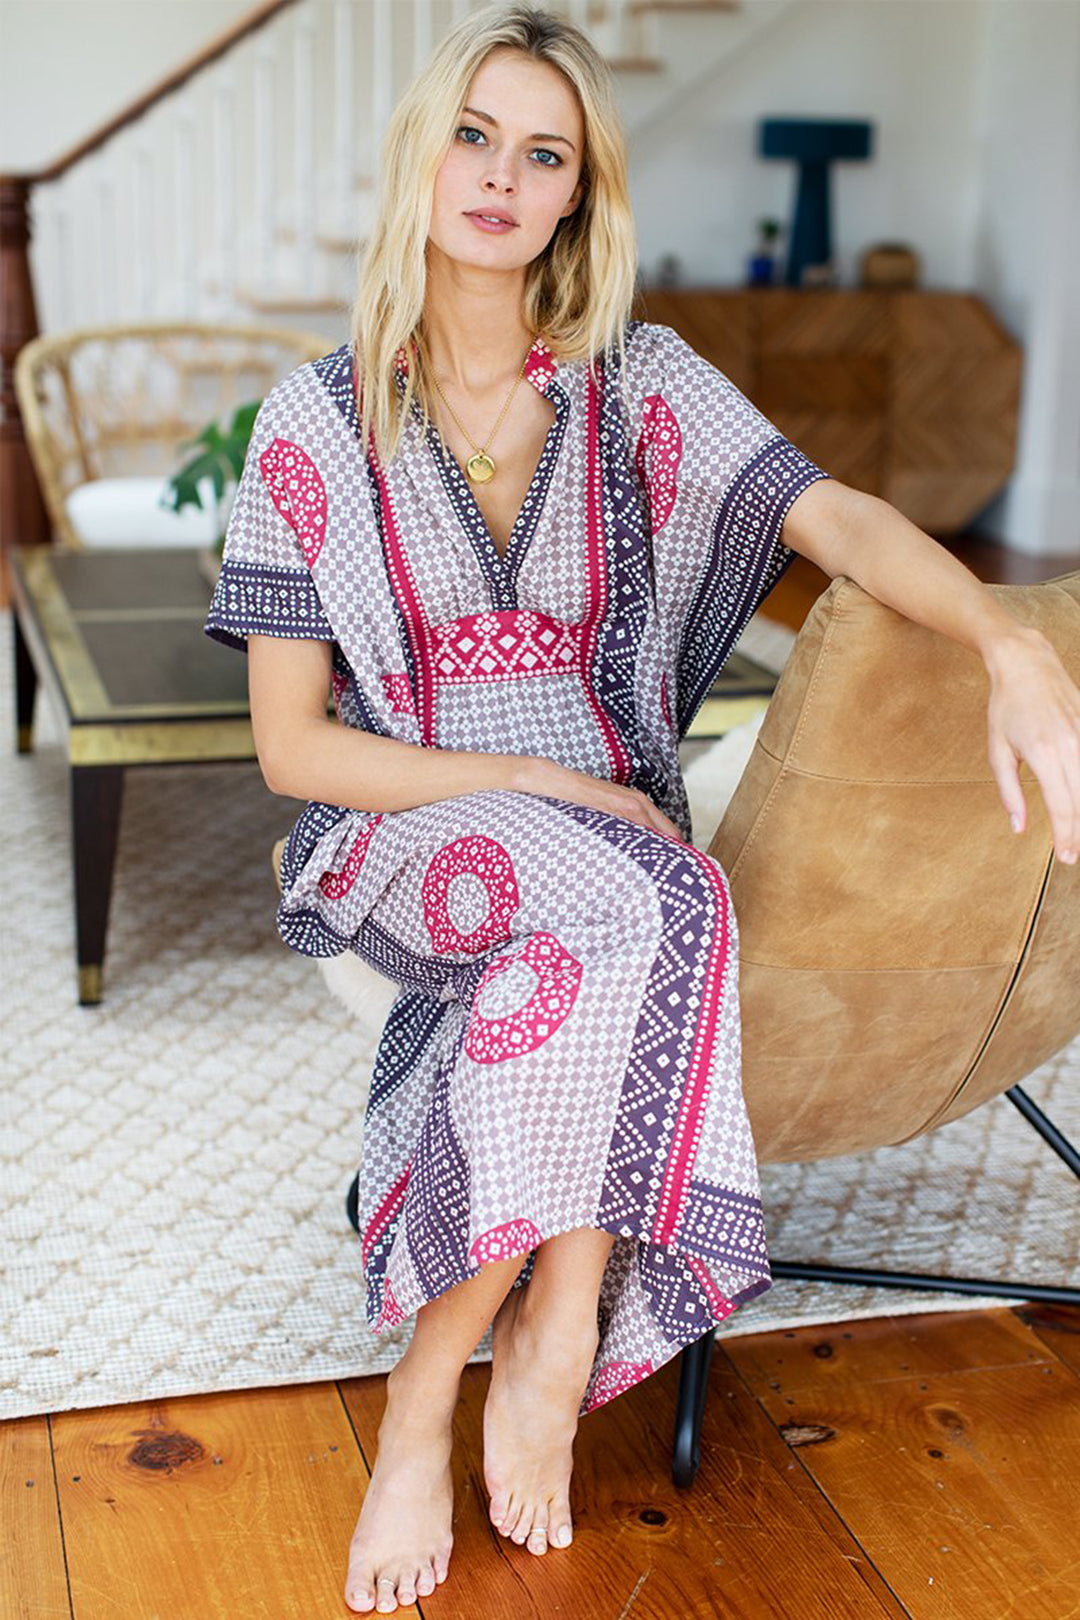 Emerson Fry Emerson Caftan beach cover-up in Butterfly Organic red and purple print at Inner Beach Co, Toronto, Canada